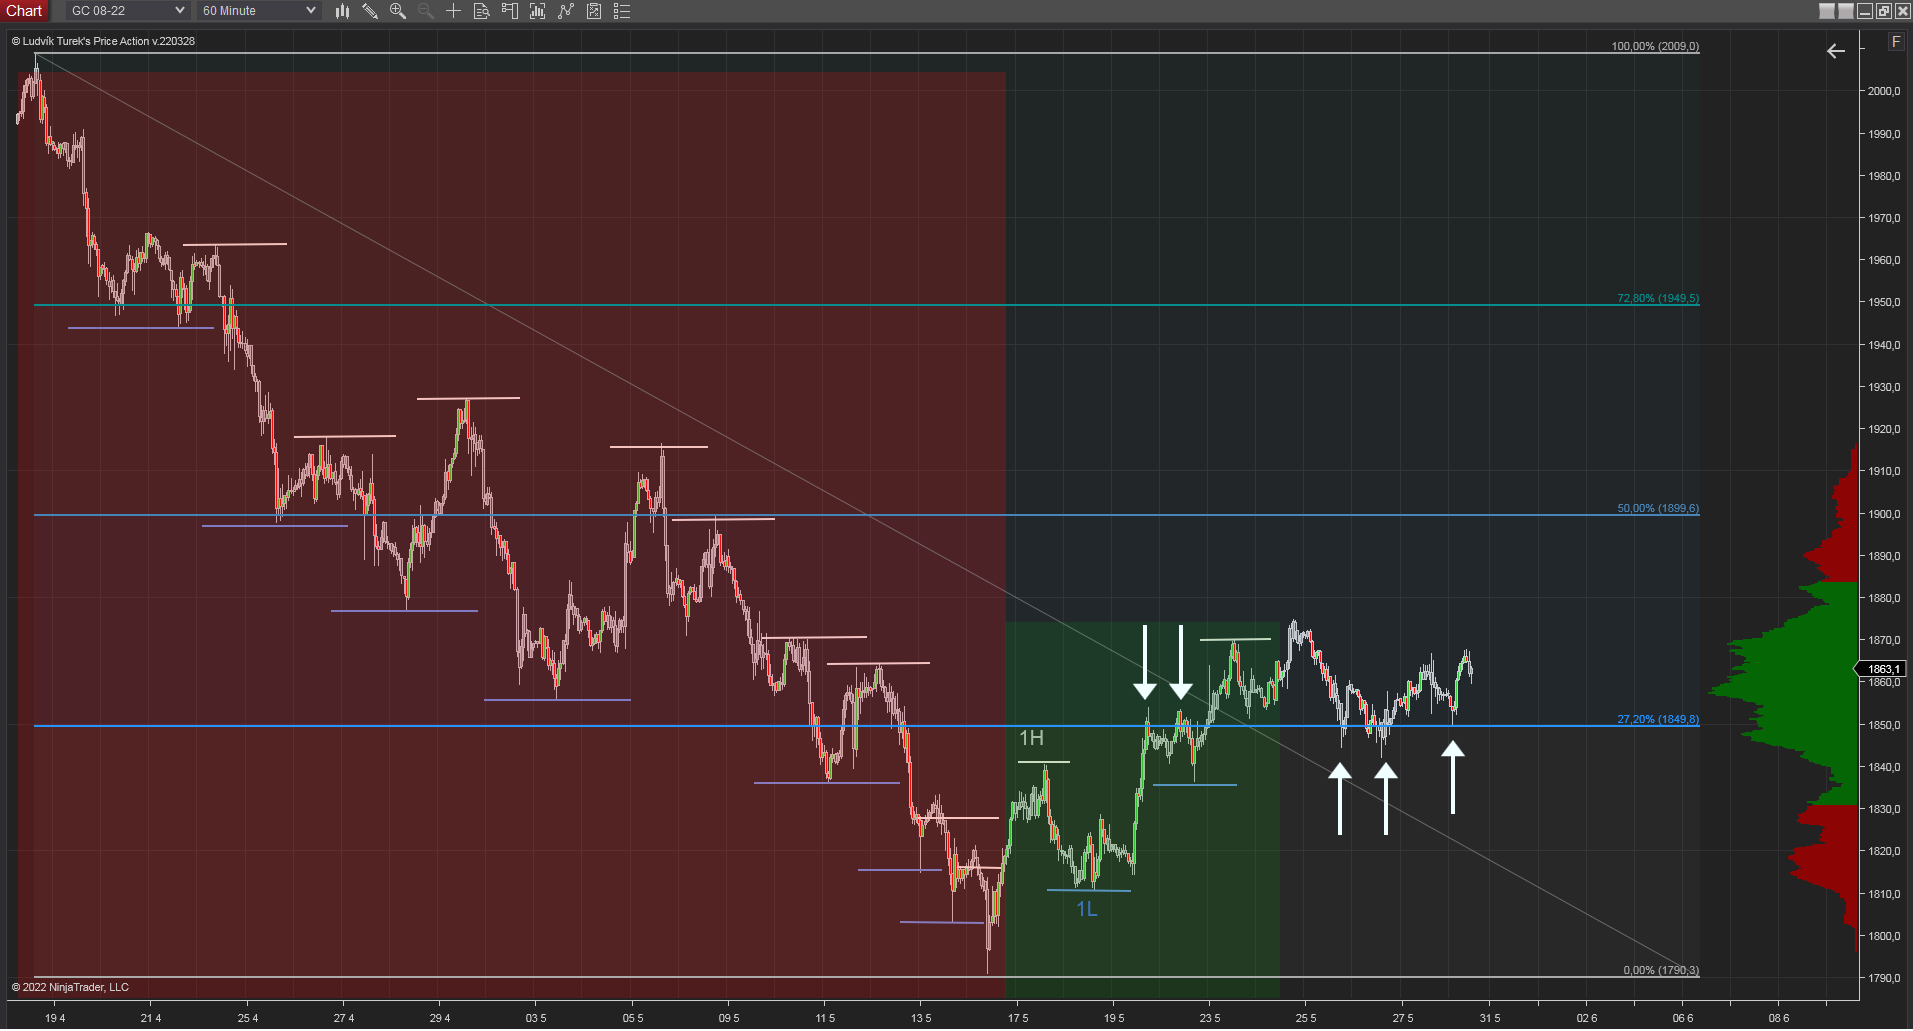 30 minutes chart of GC (Gold futures), Fibonacci level 27.2% and Monthly volume area. Source: Author's analysis